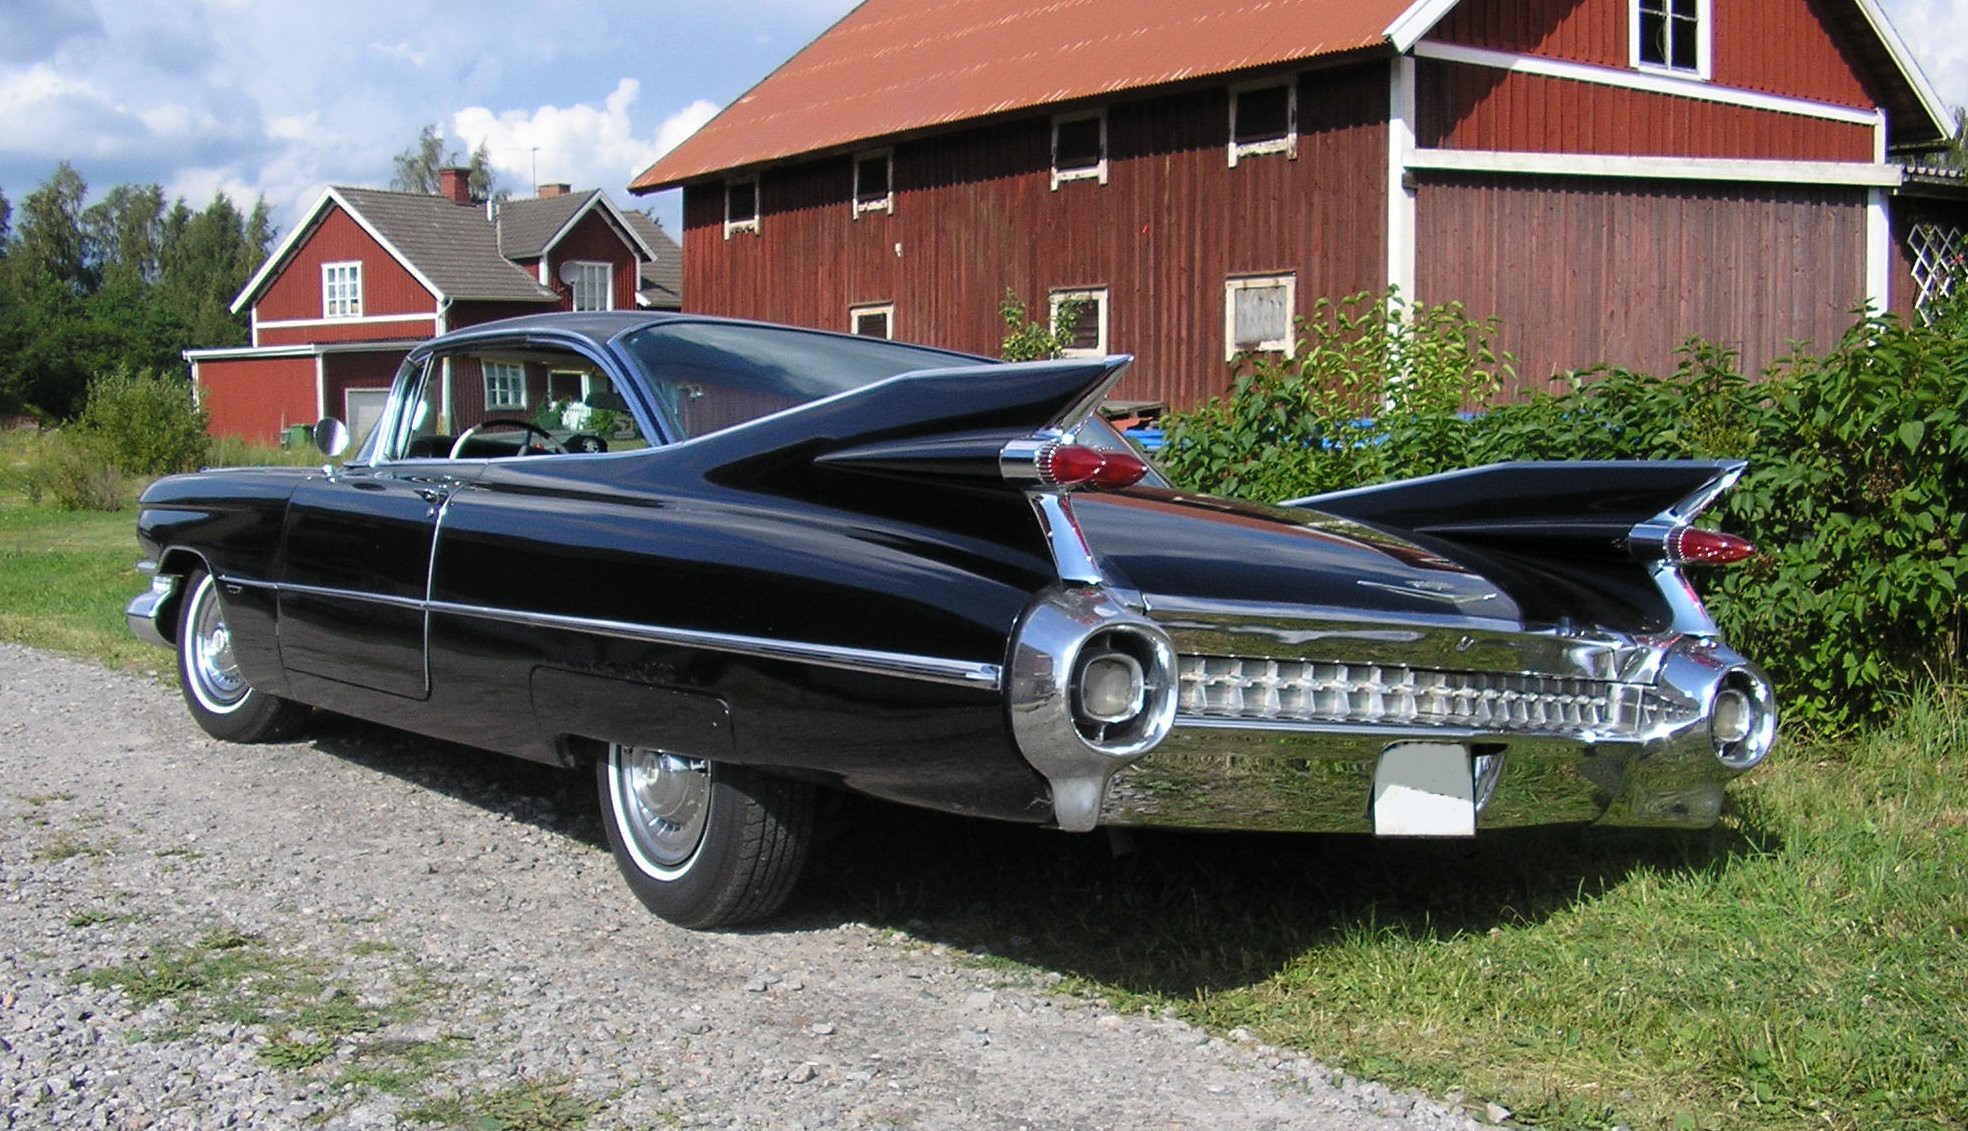 What You Need to Know About The 1959 Cadillac - Old Engine Shed